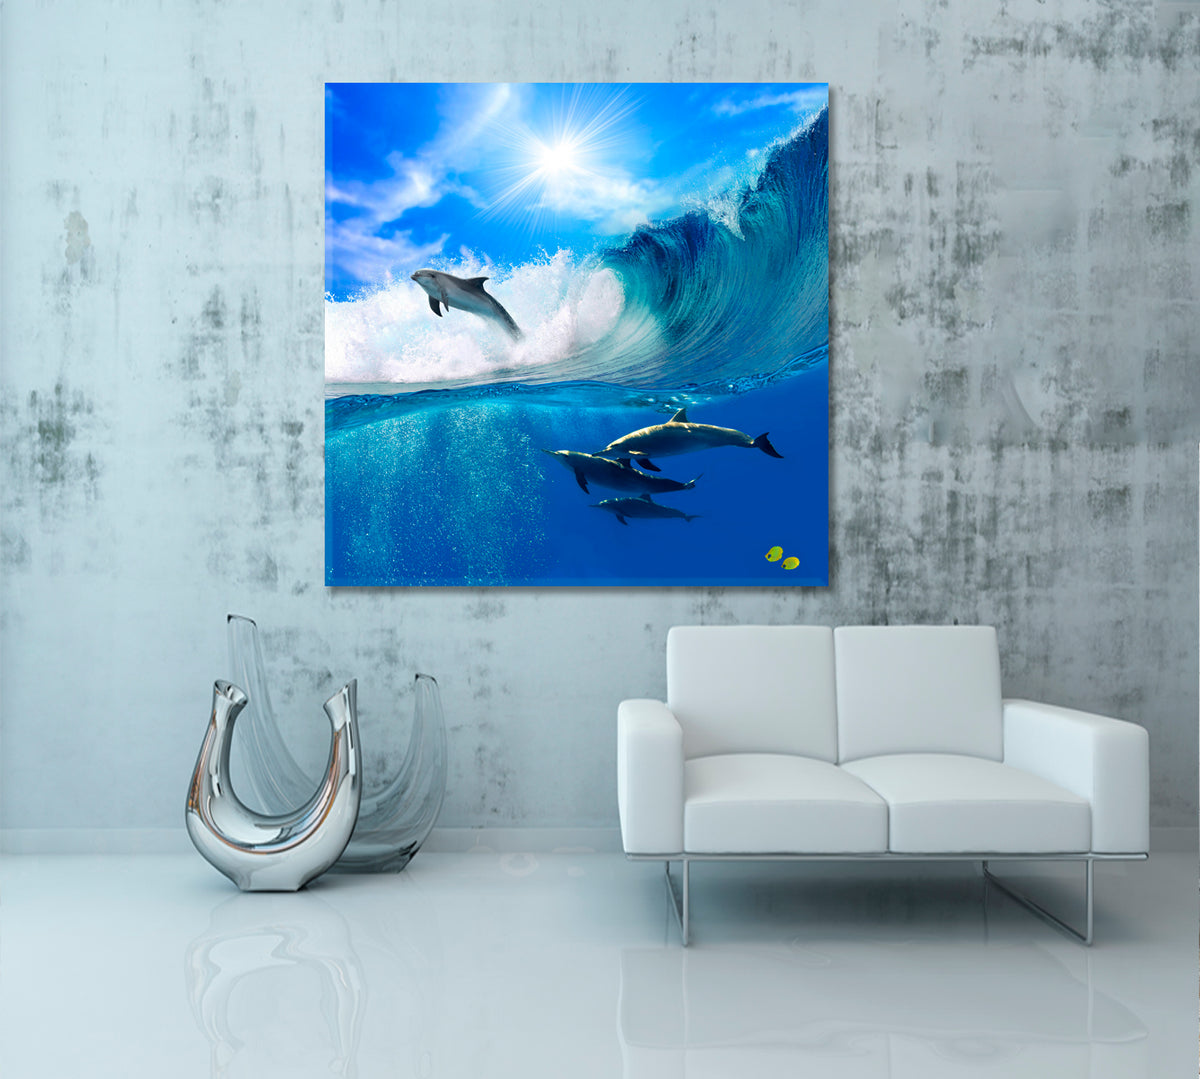 Oceanview | Flock of Playful Dolphins Canvas Print Giclée - Square Panel Nautical, Sea Life Pattern Art Artesty 1 Panel 12"x12" 